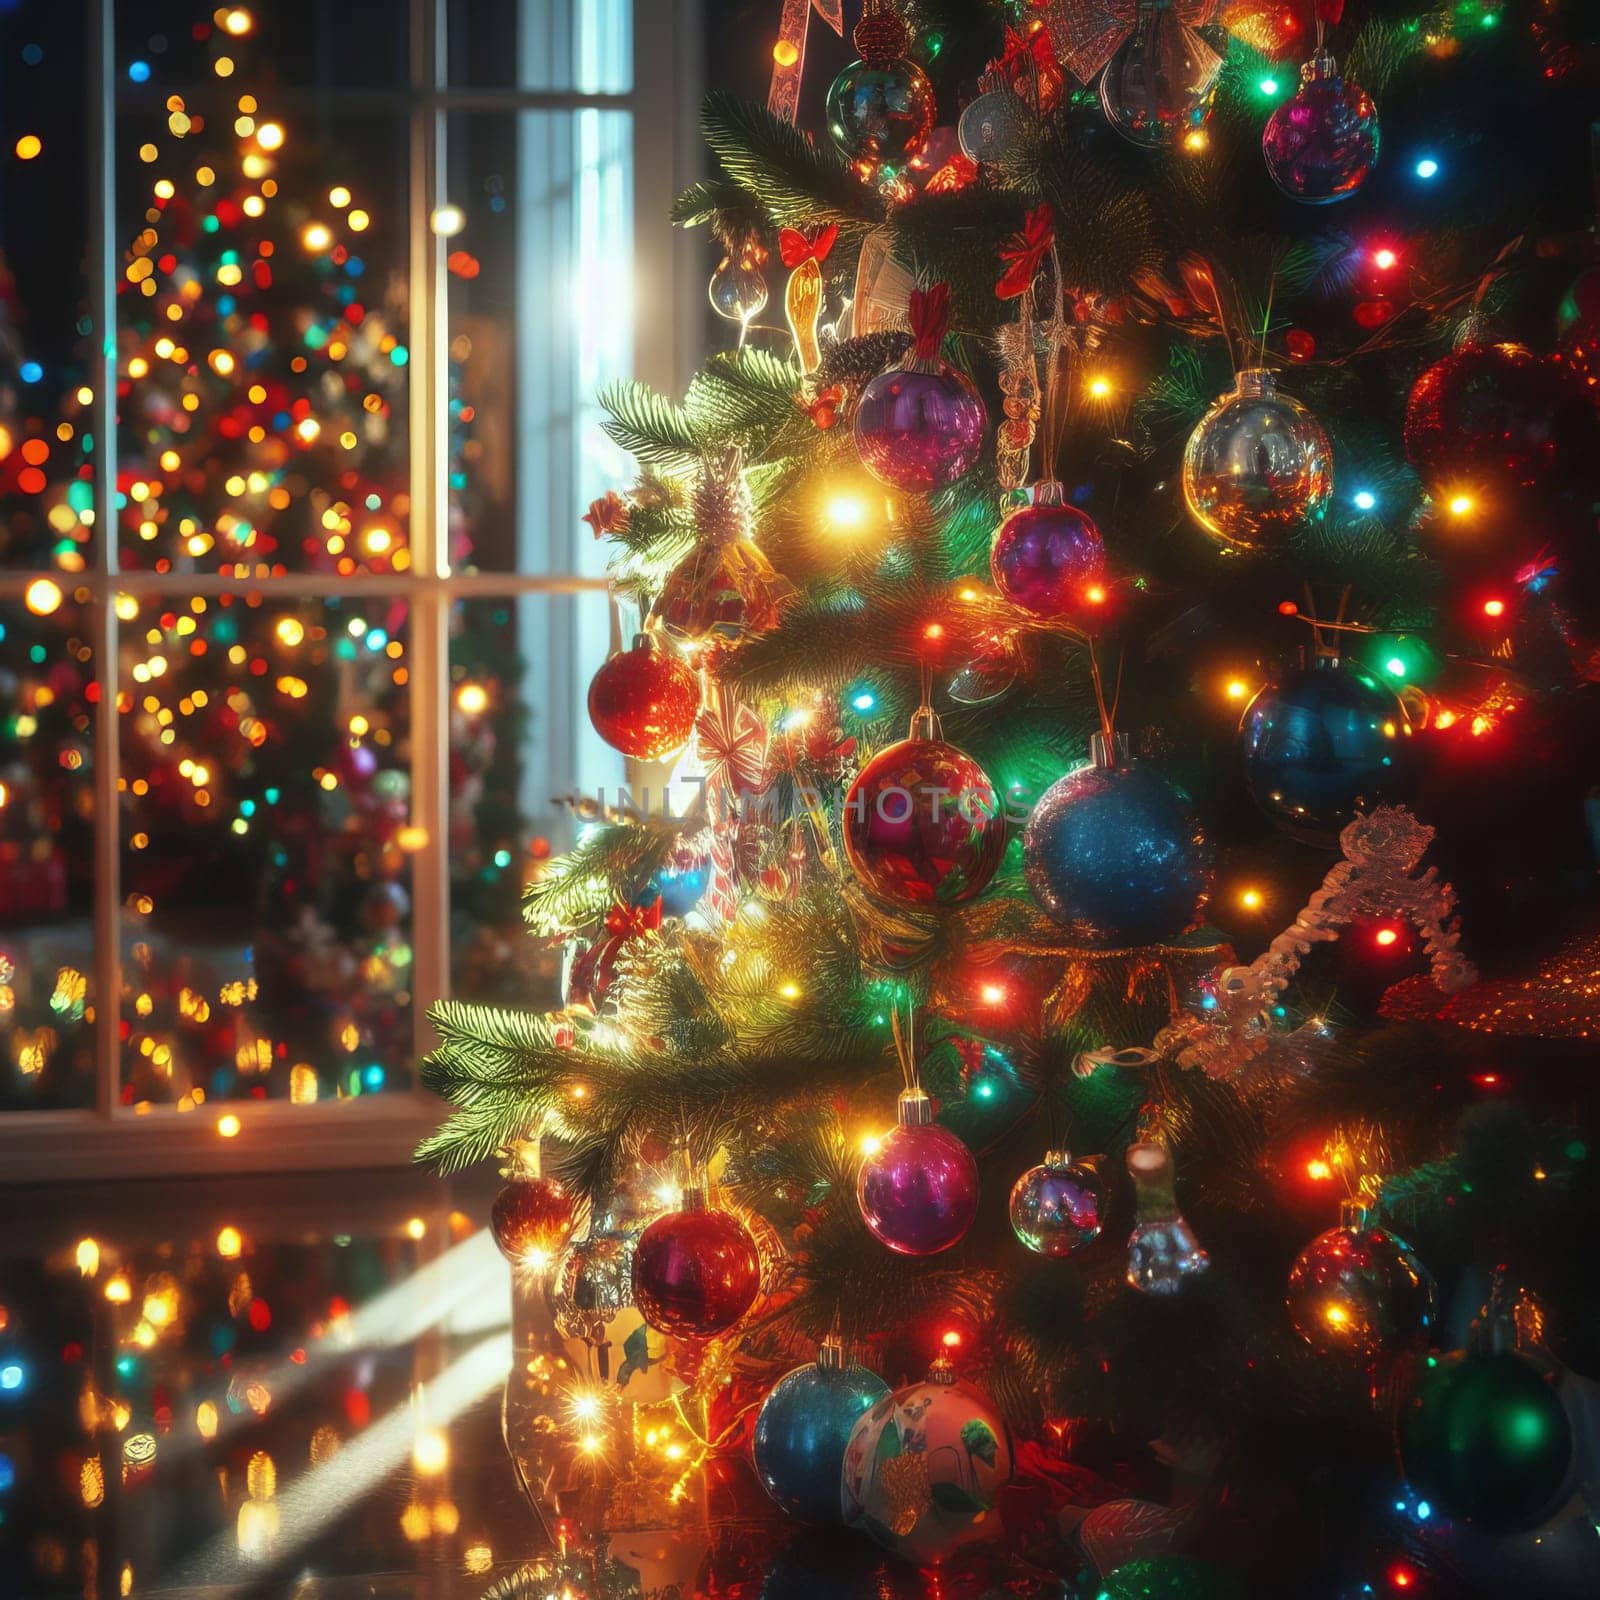 Interior Christmas. magic glowing tree, gifts in dark at night. High quality photo.